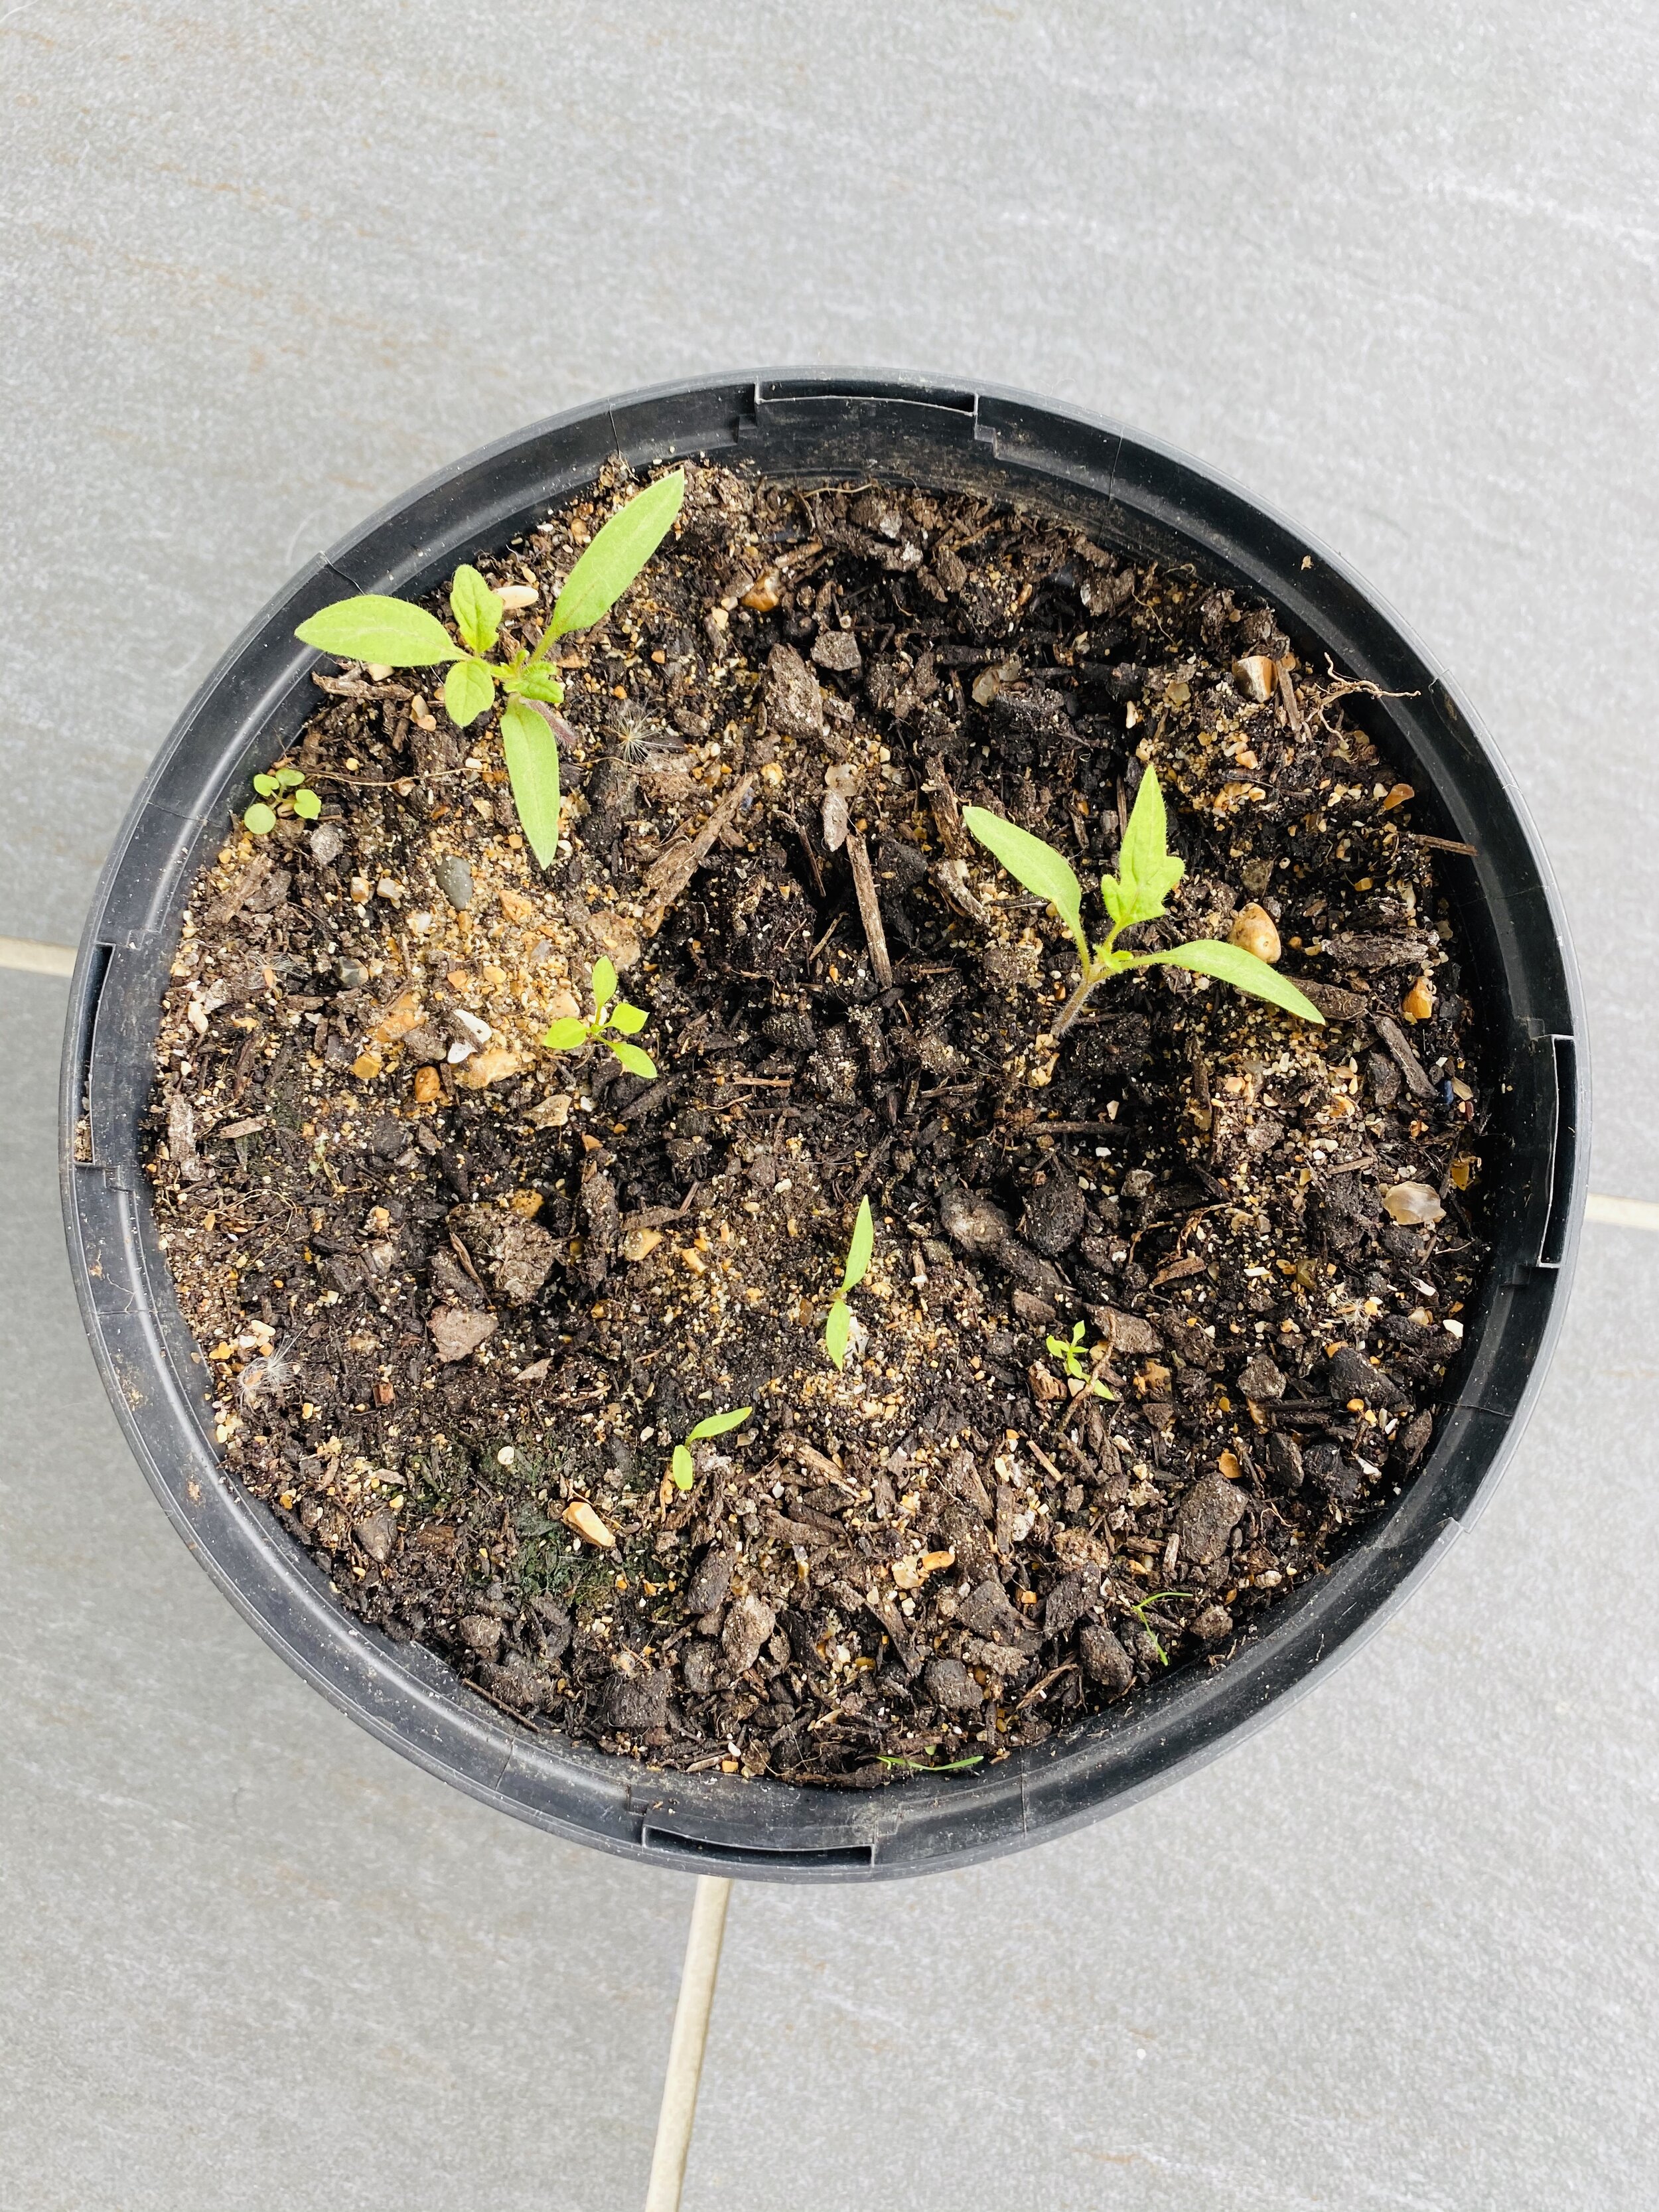 Tomato seedlings grown from tomato slices!